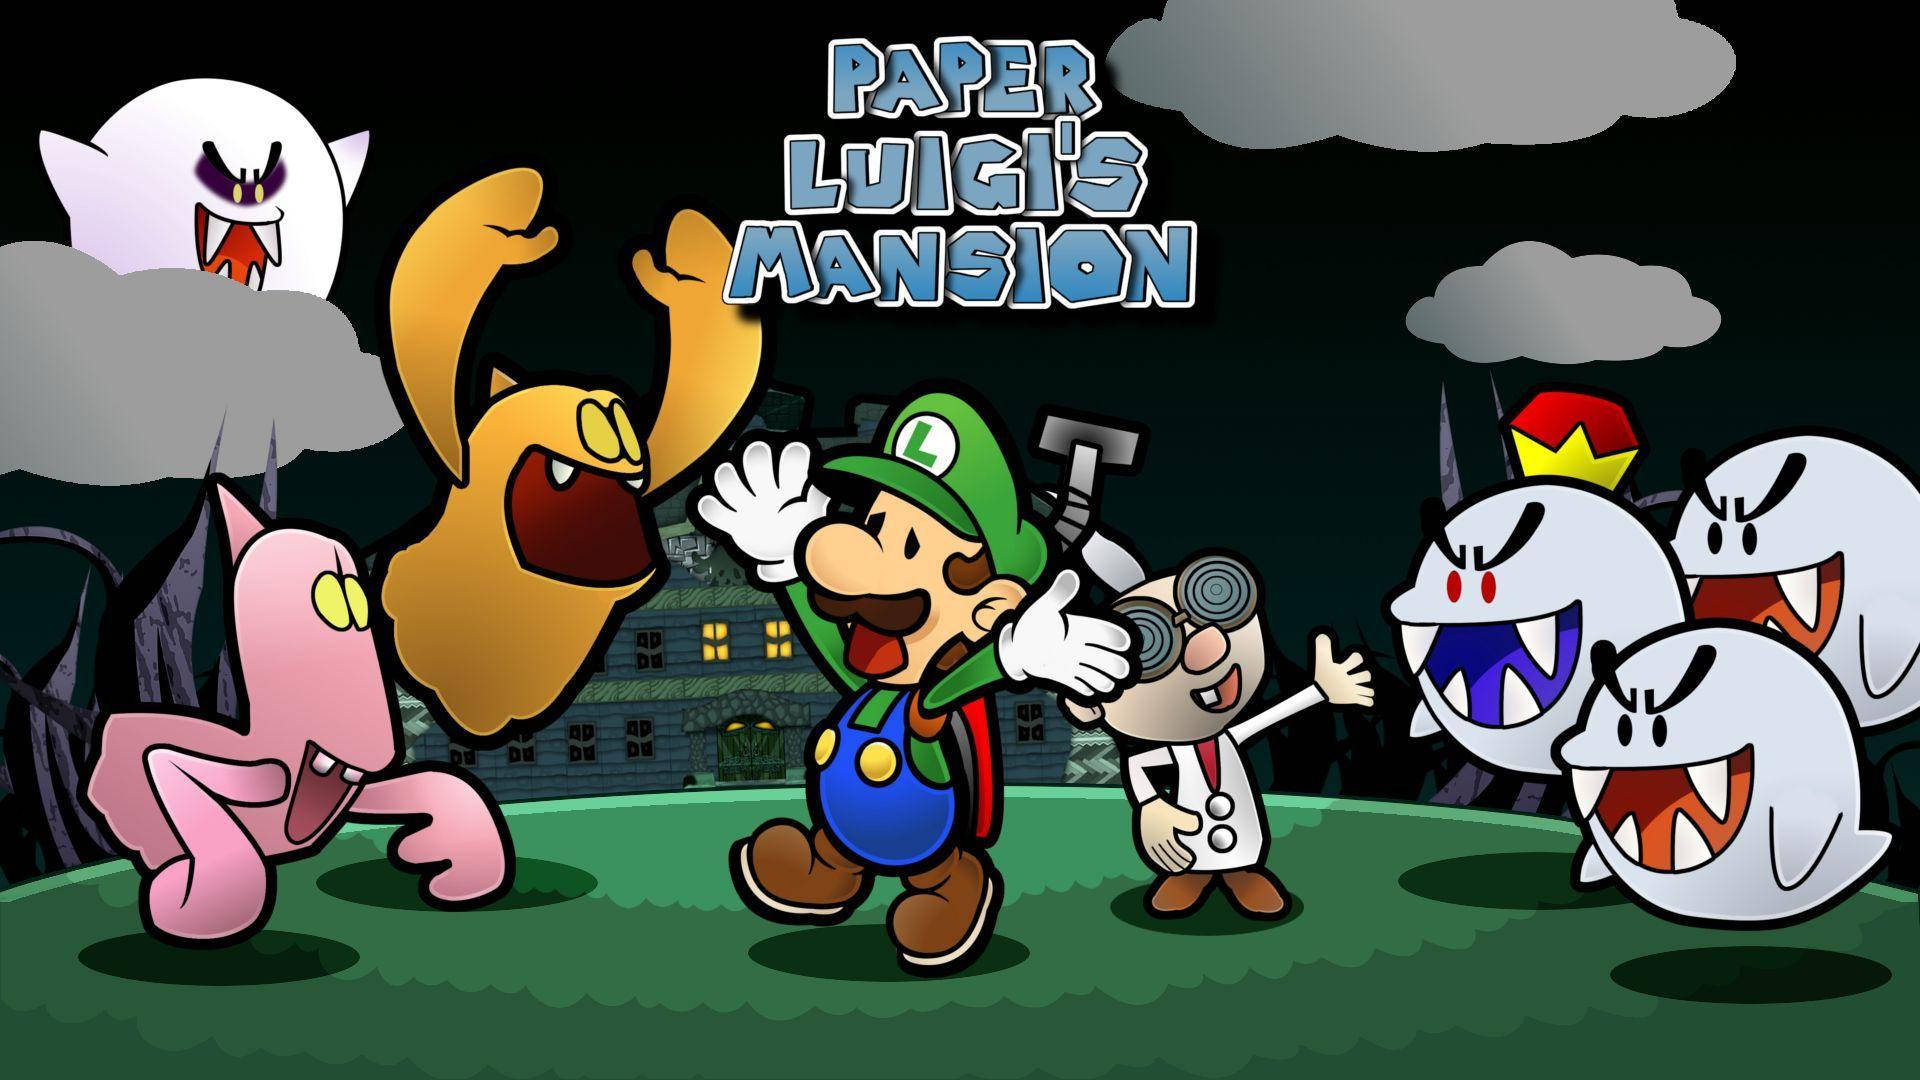 Luigi's Mansion 3 Characters In Paper Mario Style Background